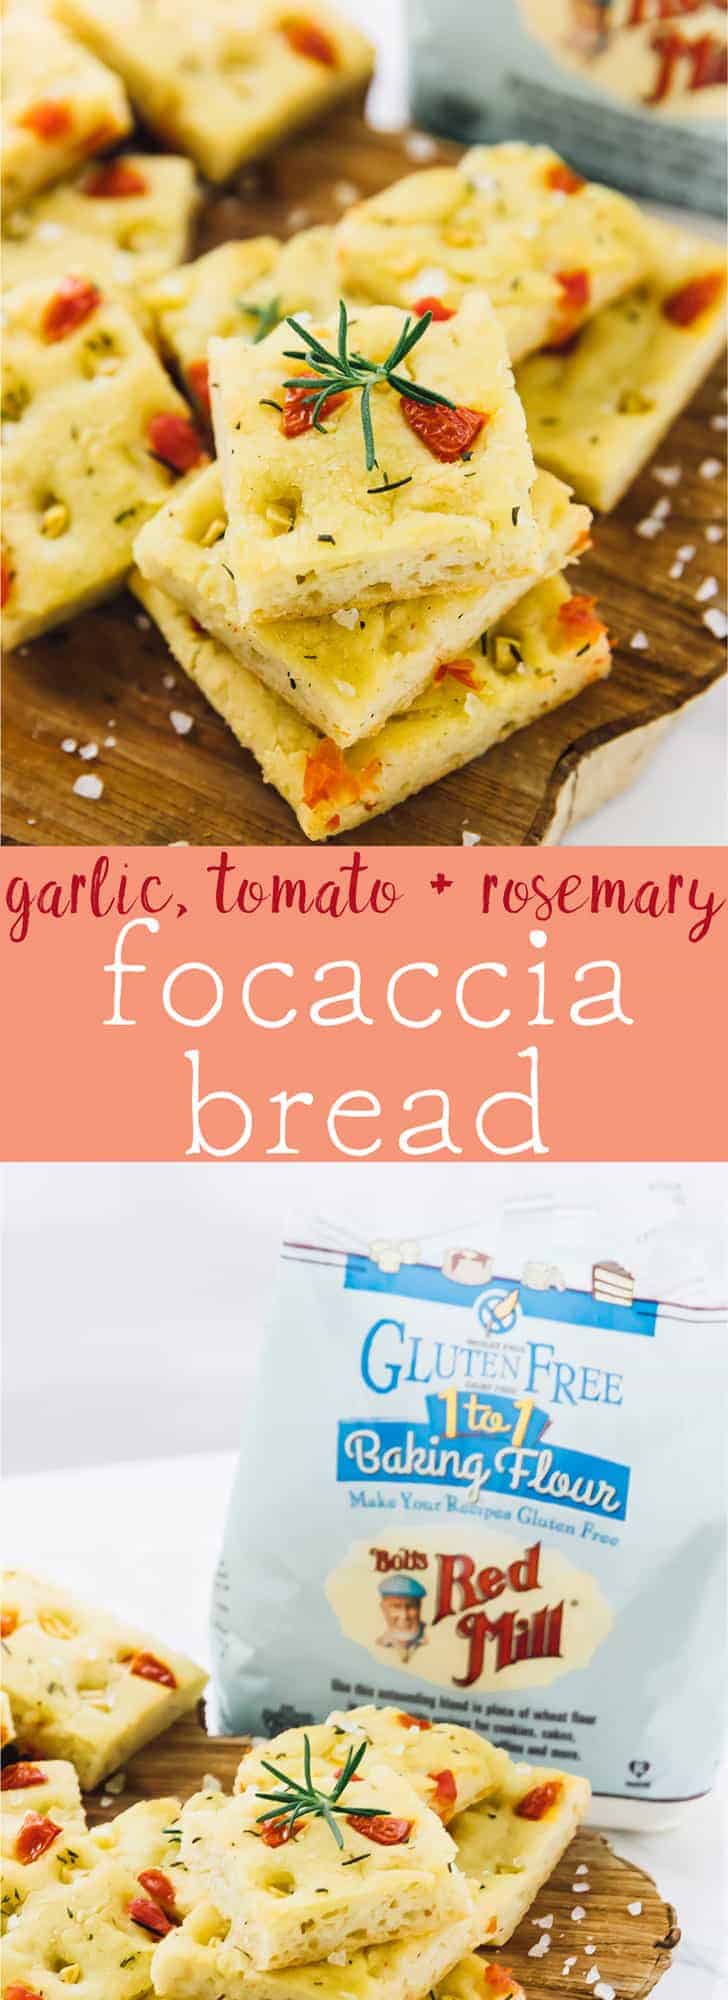 This Gluten Free Focaccia Bread has the perfect texture and taste! It's flavour is made even better with roasted garlic, rosemary and tomatoes! Great for easy bread making, to go with soups and to make sandwiches!! via https://jessicainthekitchen.com